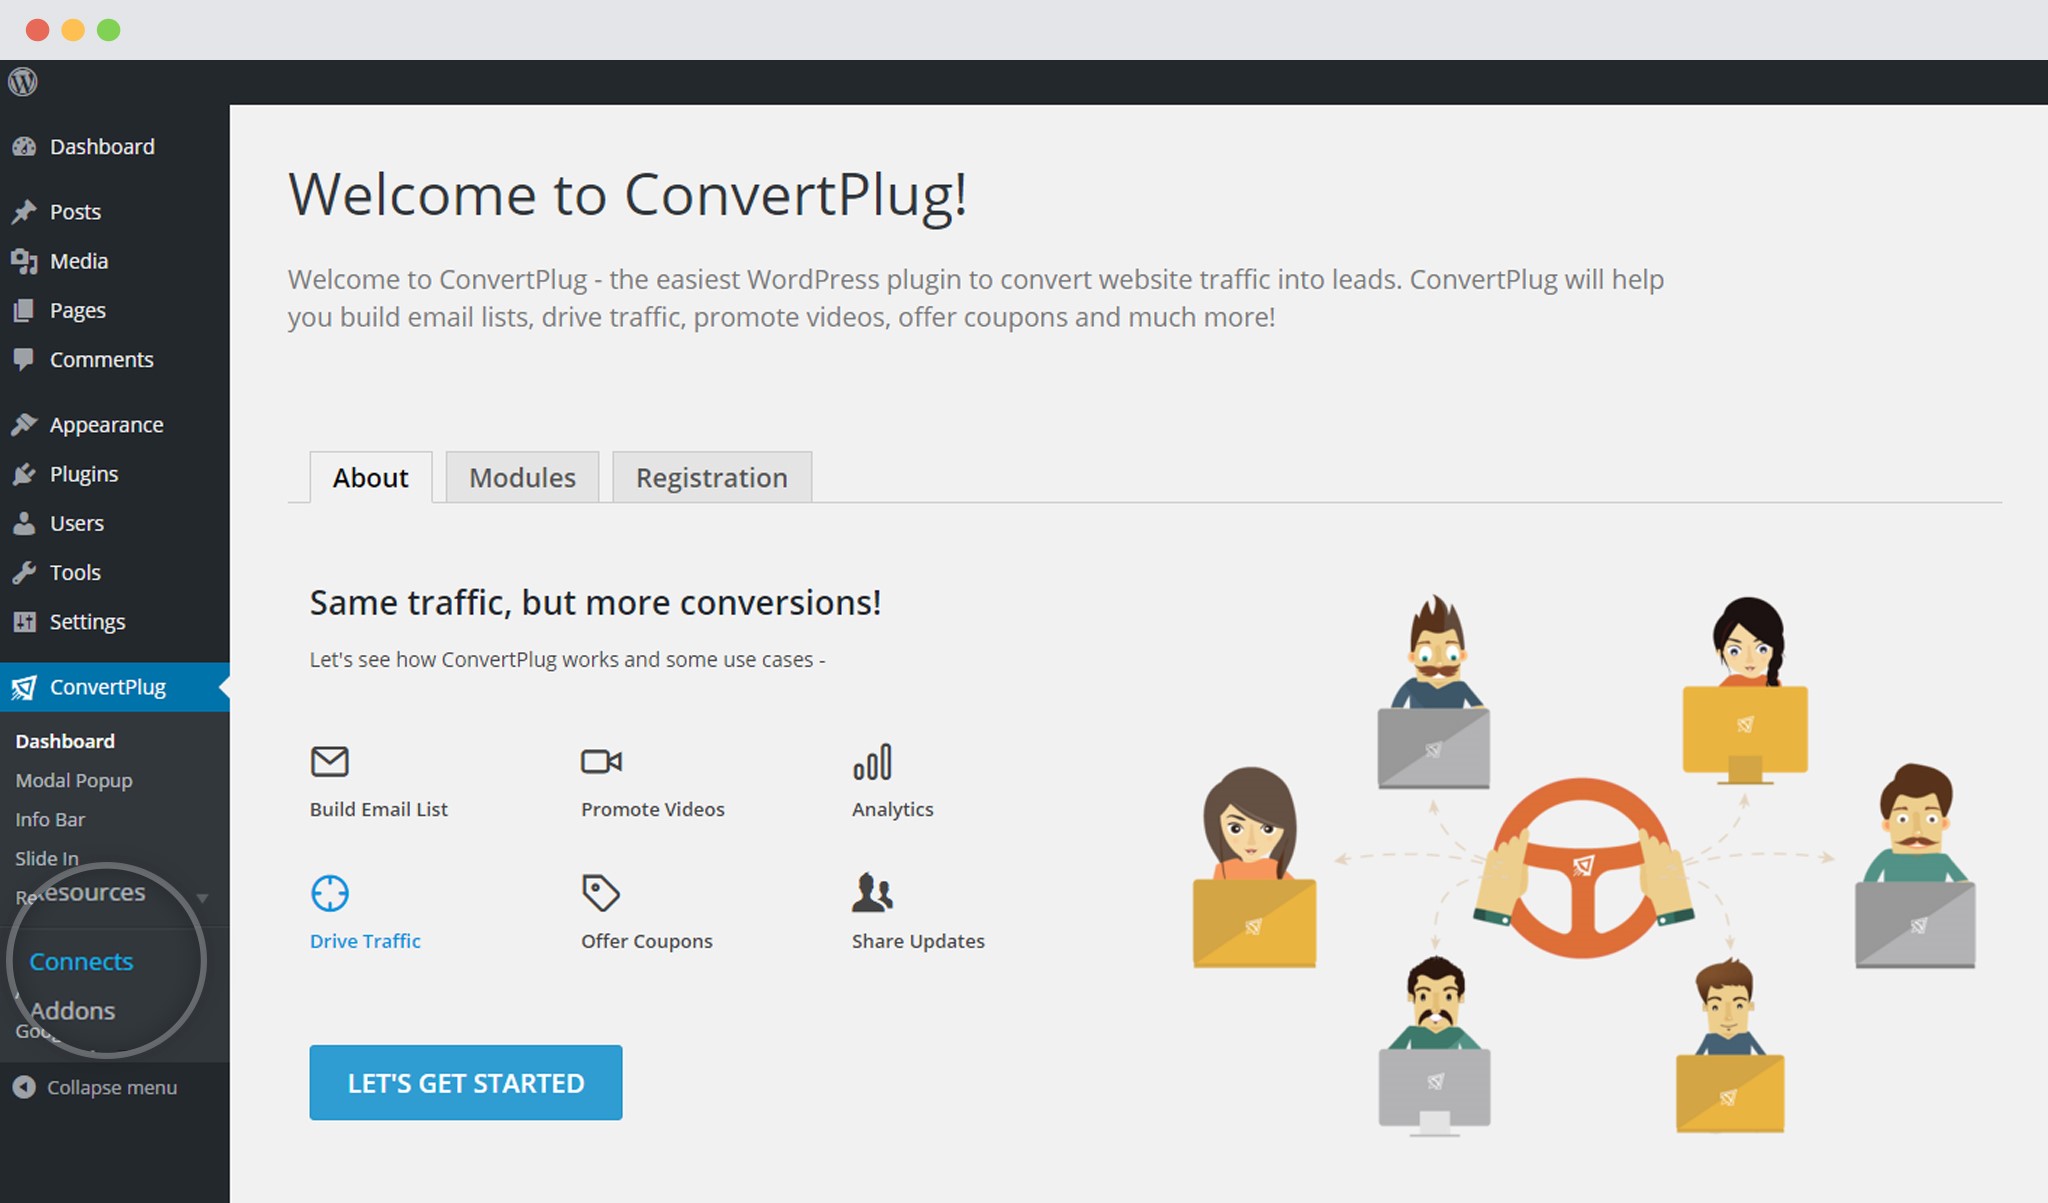 Connects page in ConvertPlug